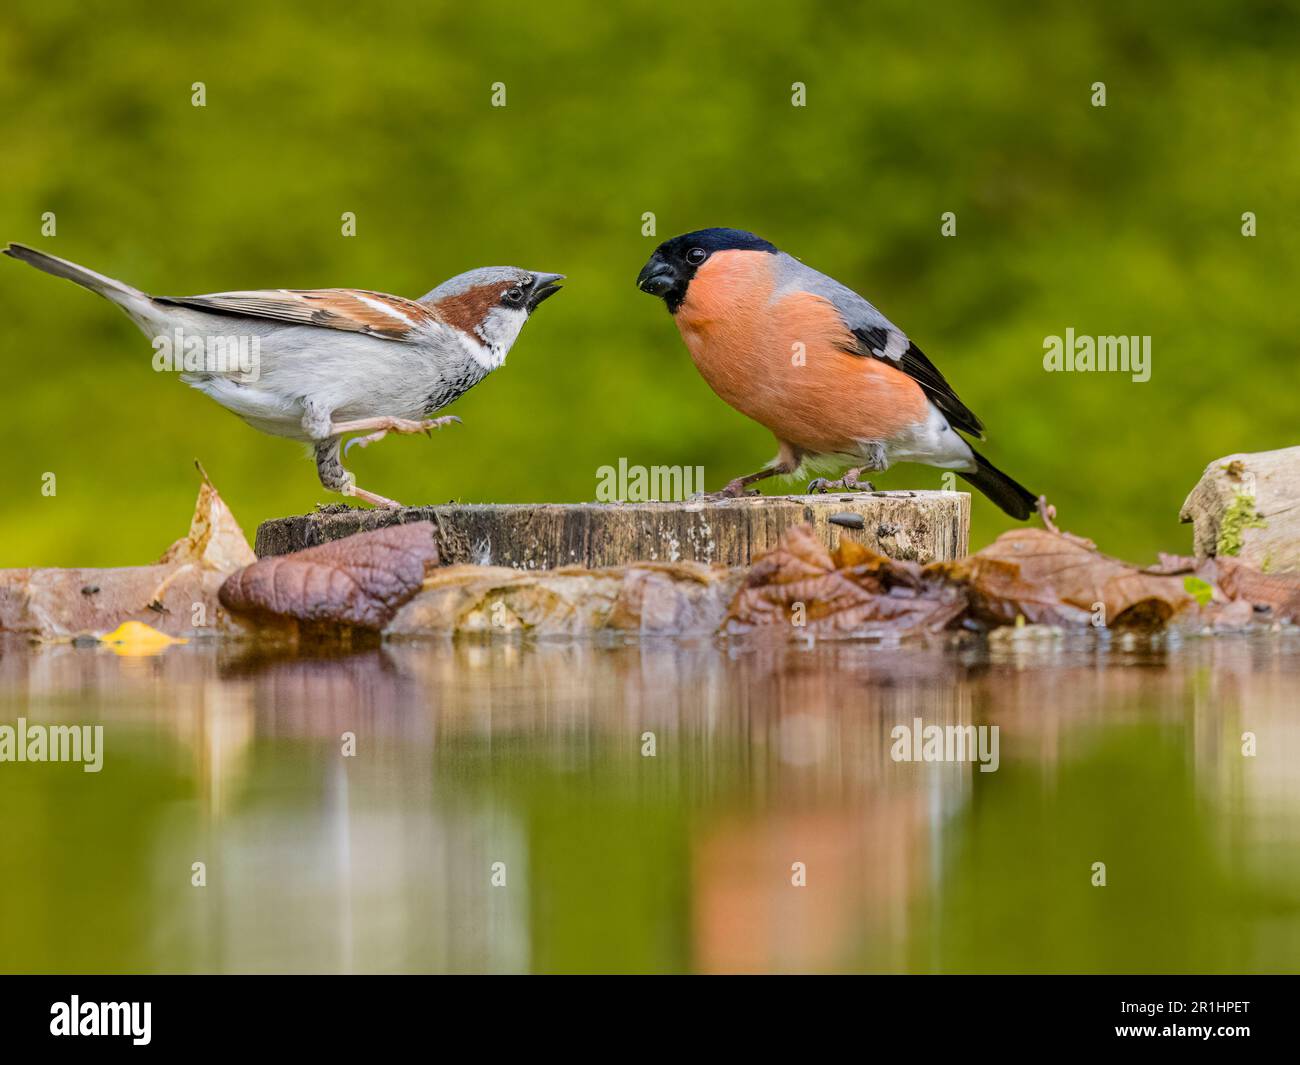 Aberystwyth, Ceredigion, Wales, UK. 14th May, 2023. A pair of bullfinches are feeding close to the edge of a garden pool. A male sparrow has scared the female off and then approaches the male bullfinch who also makes a quick escape. Credit: Phil Jones/Alamy Live News Stock Photo